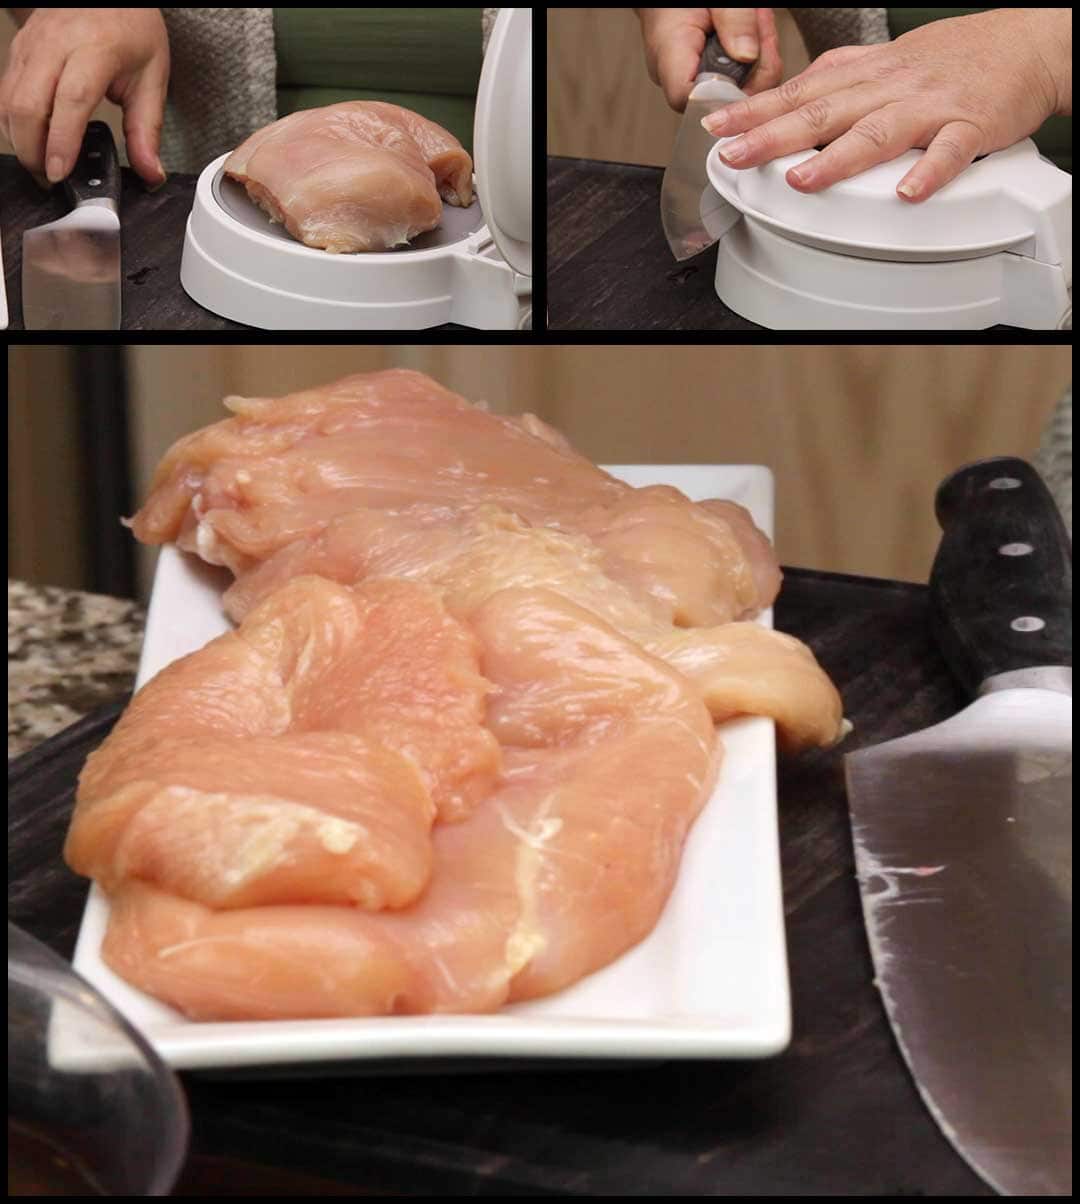 using the close n cut to cut the chicken in half